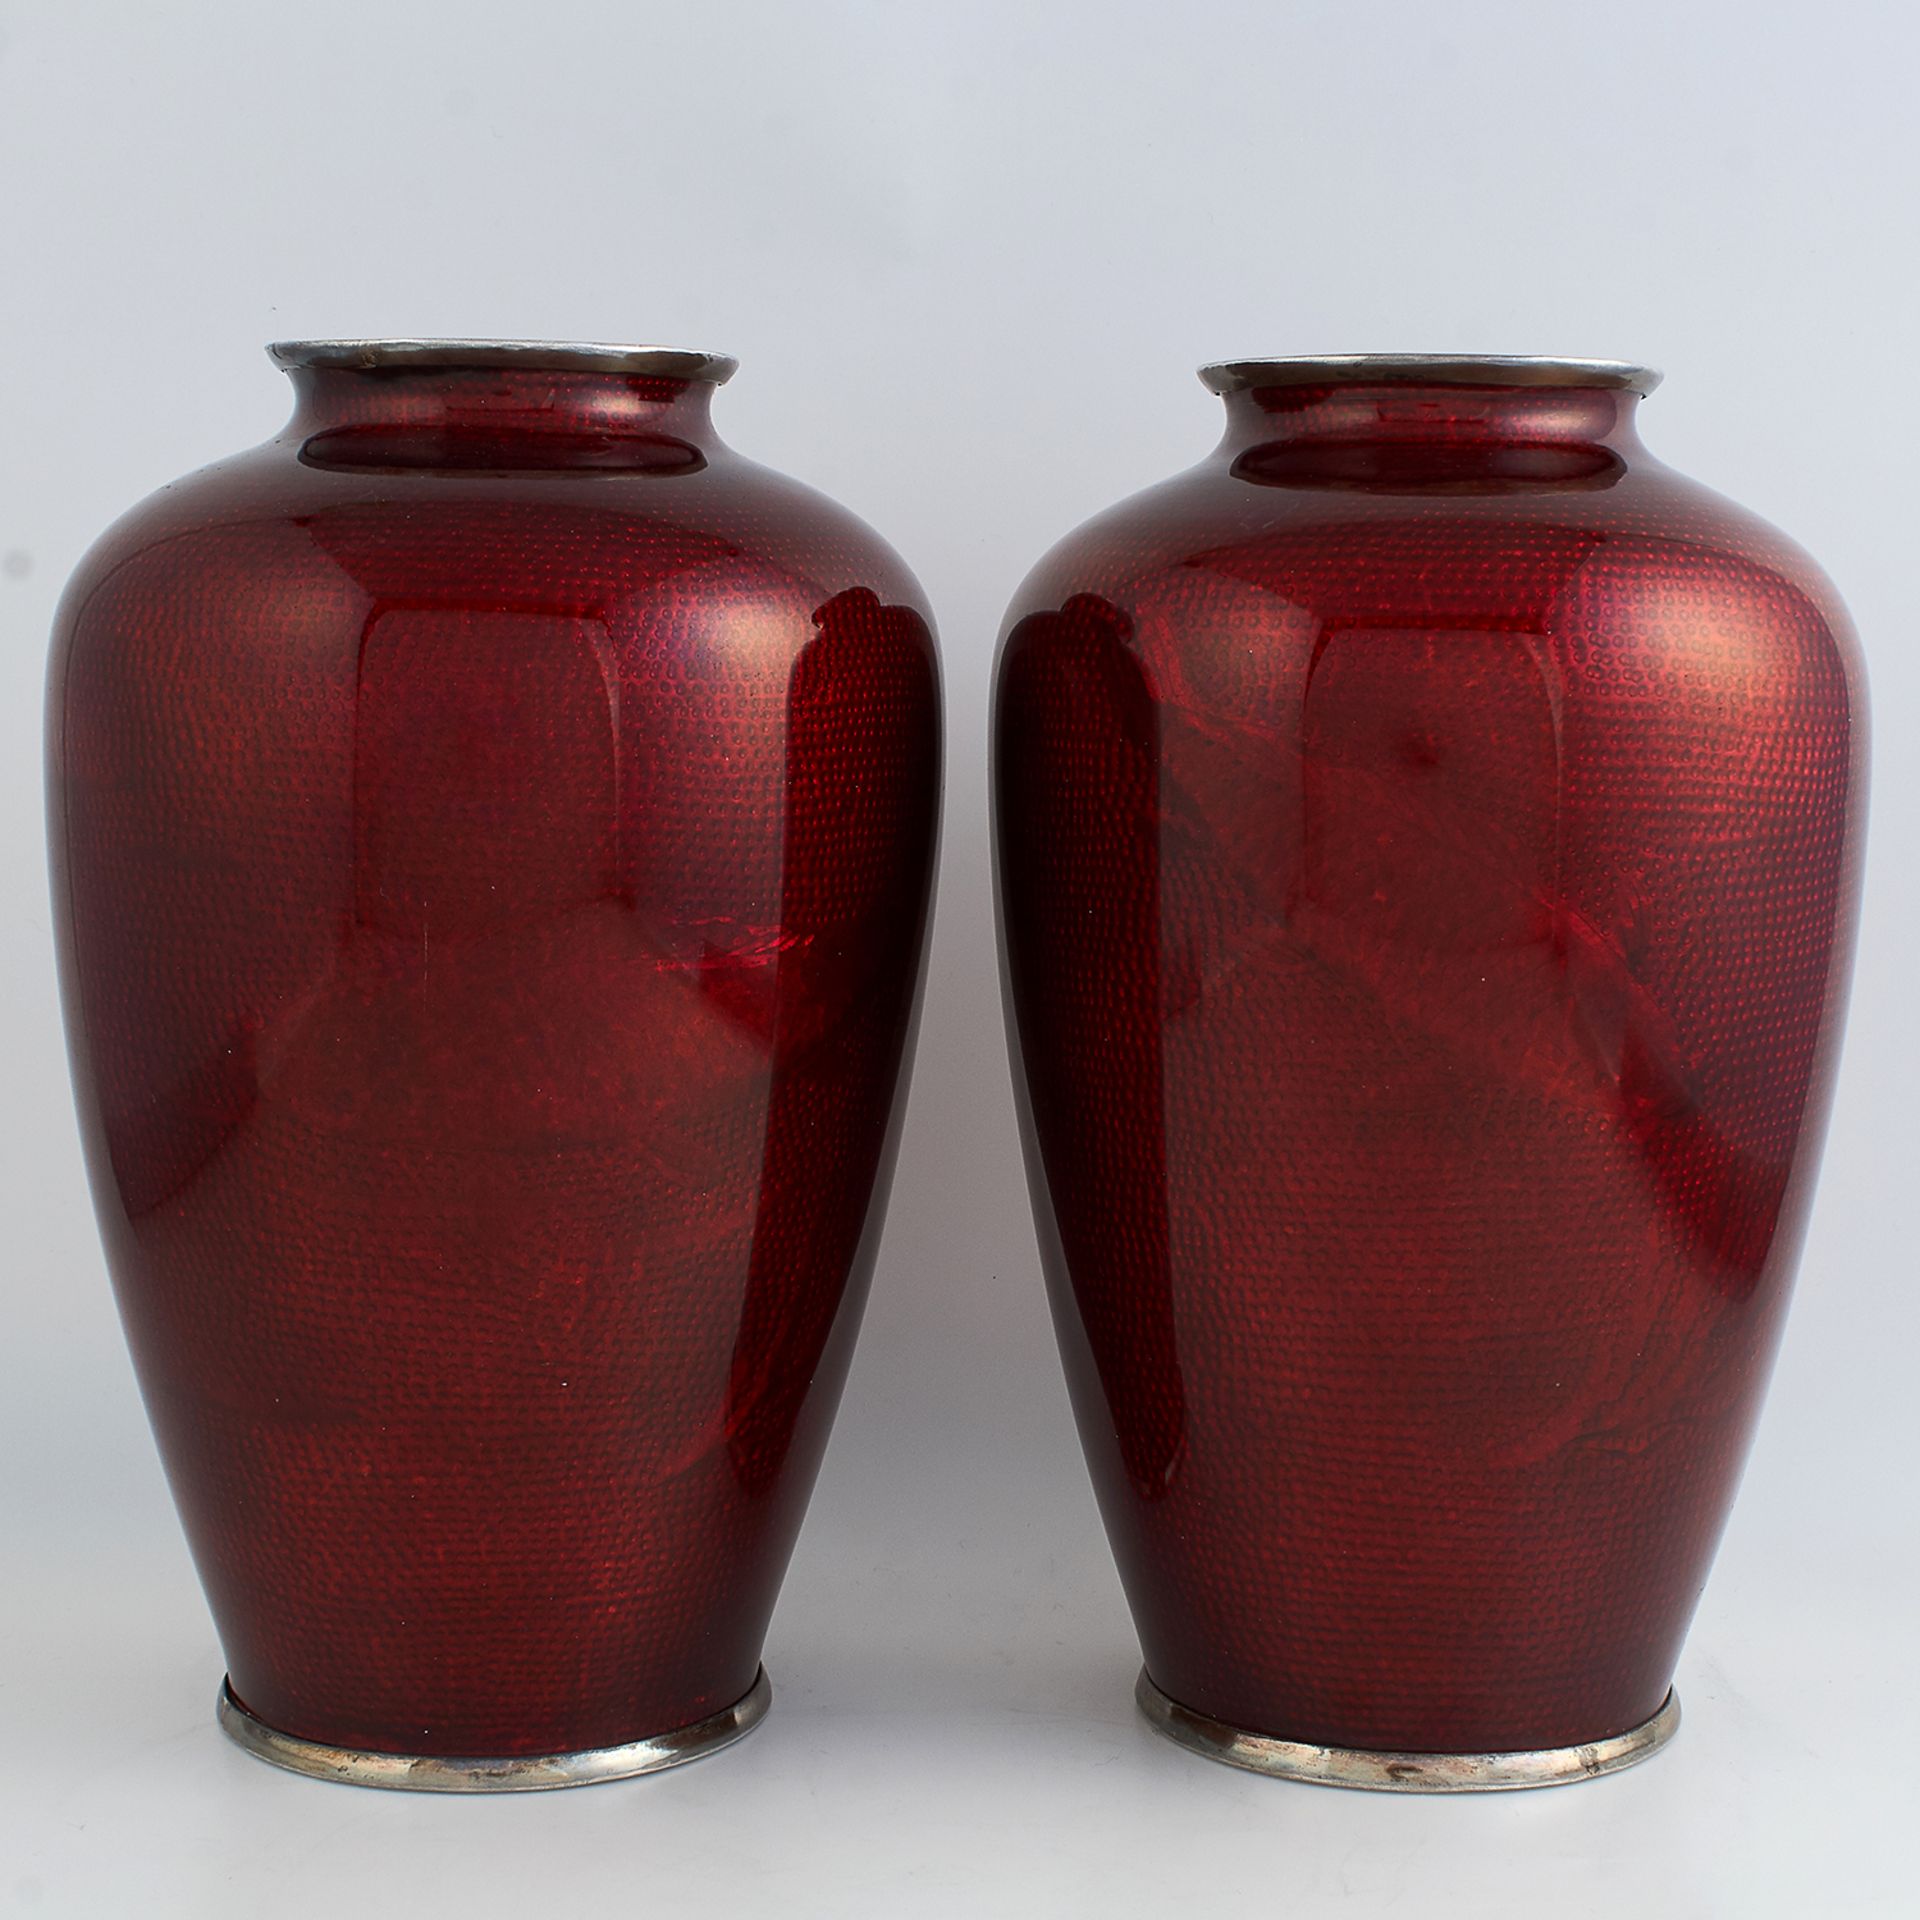 PAIR OF ANTIQUE SILVER AND ENAMEL VASES CIRCA 1920 the tapering rounded bodies decorated in red